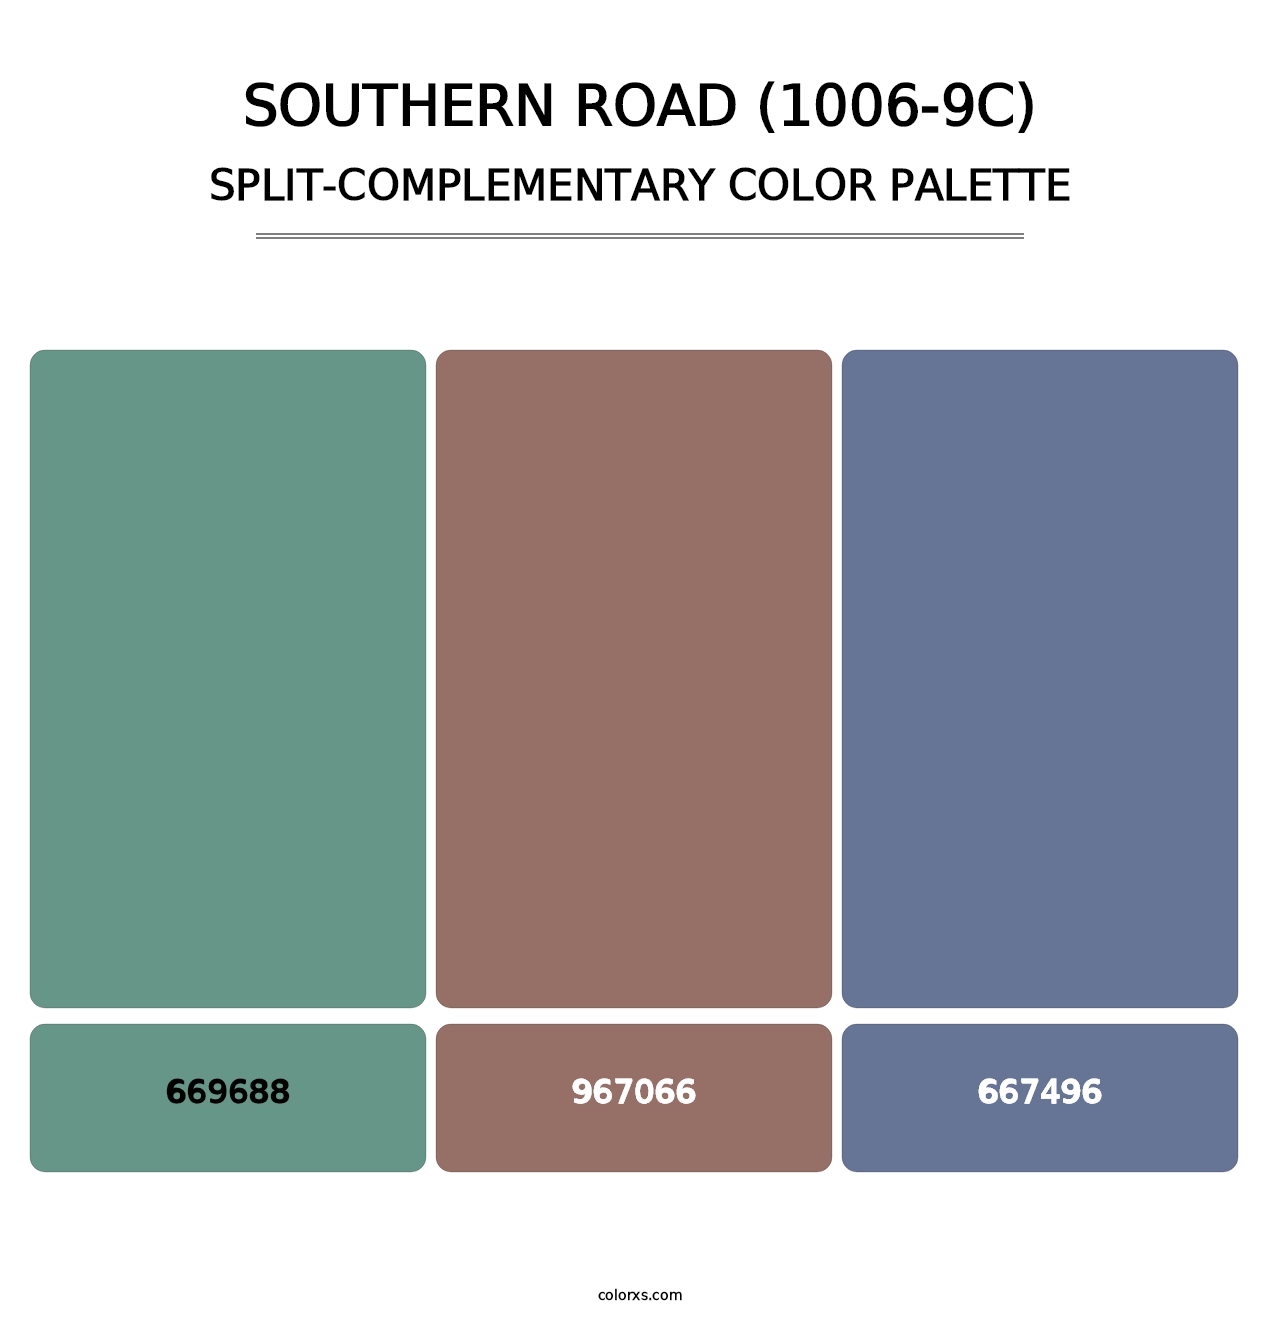 Southern Road (1006-9C) - Split-Complementary Color Palette